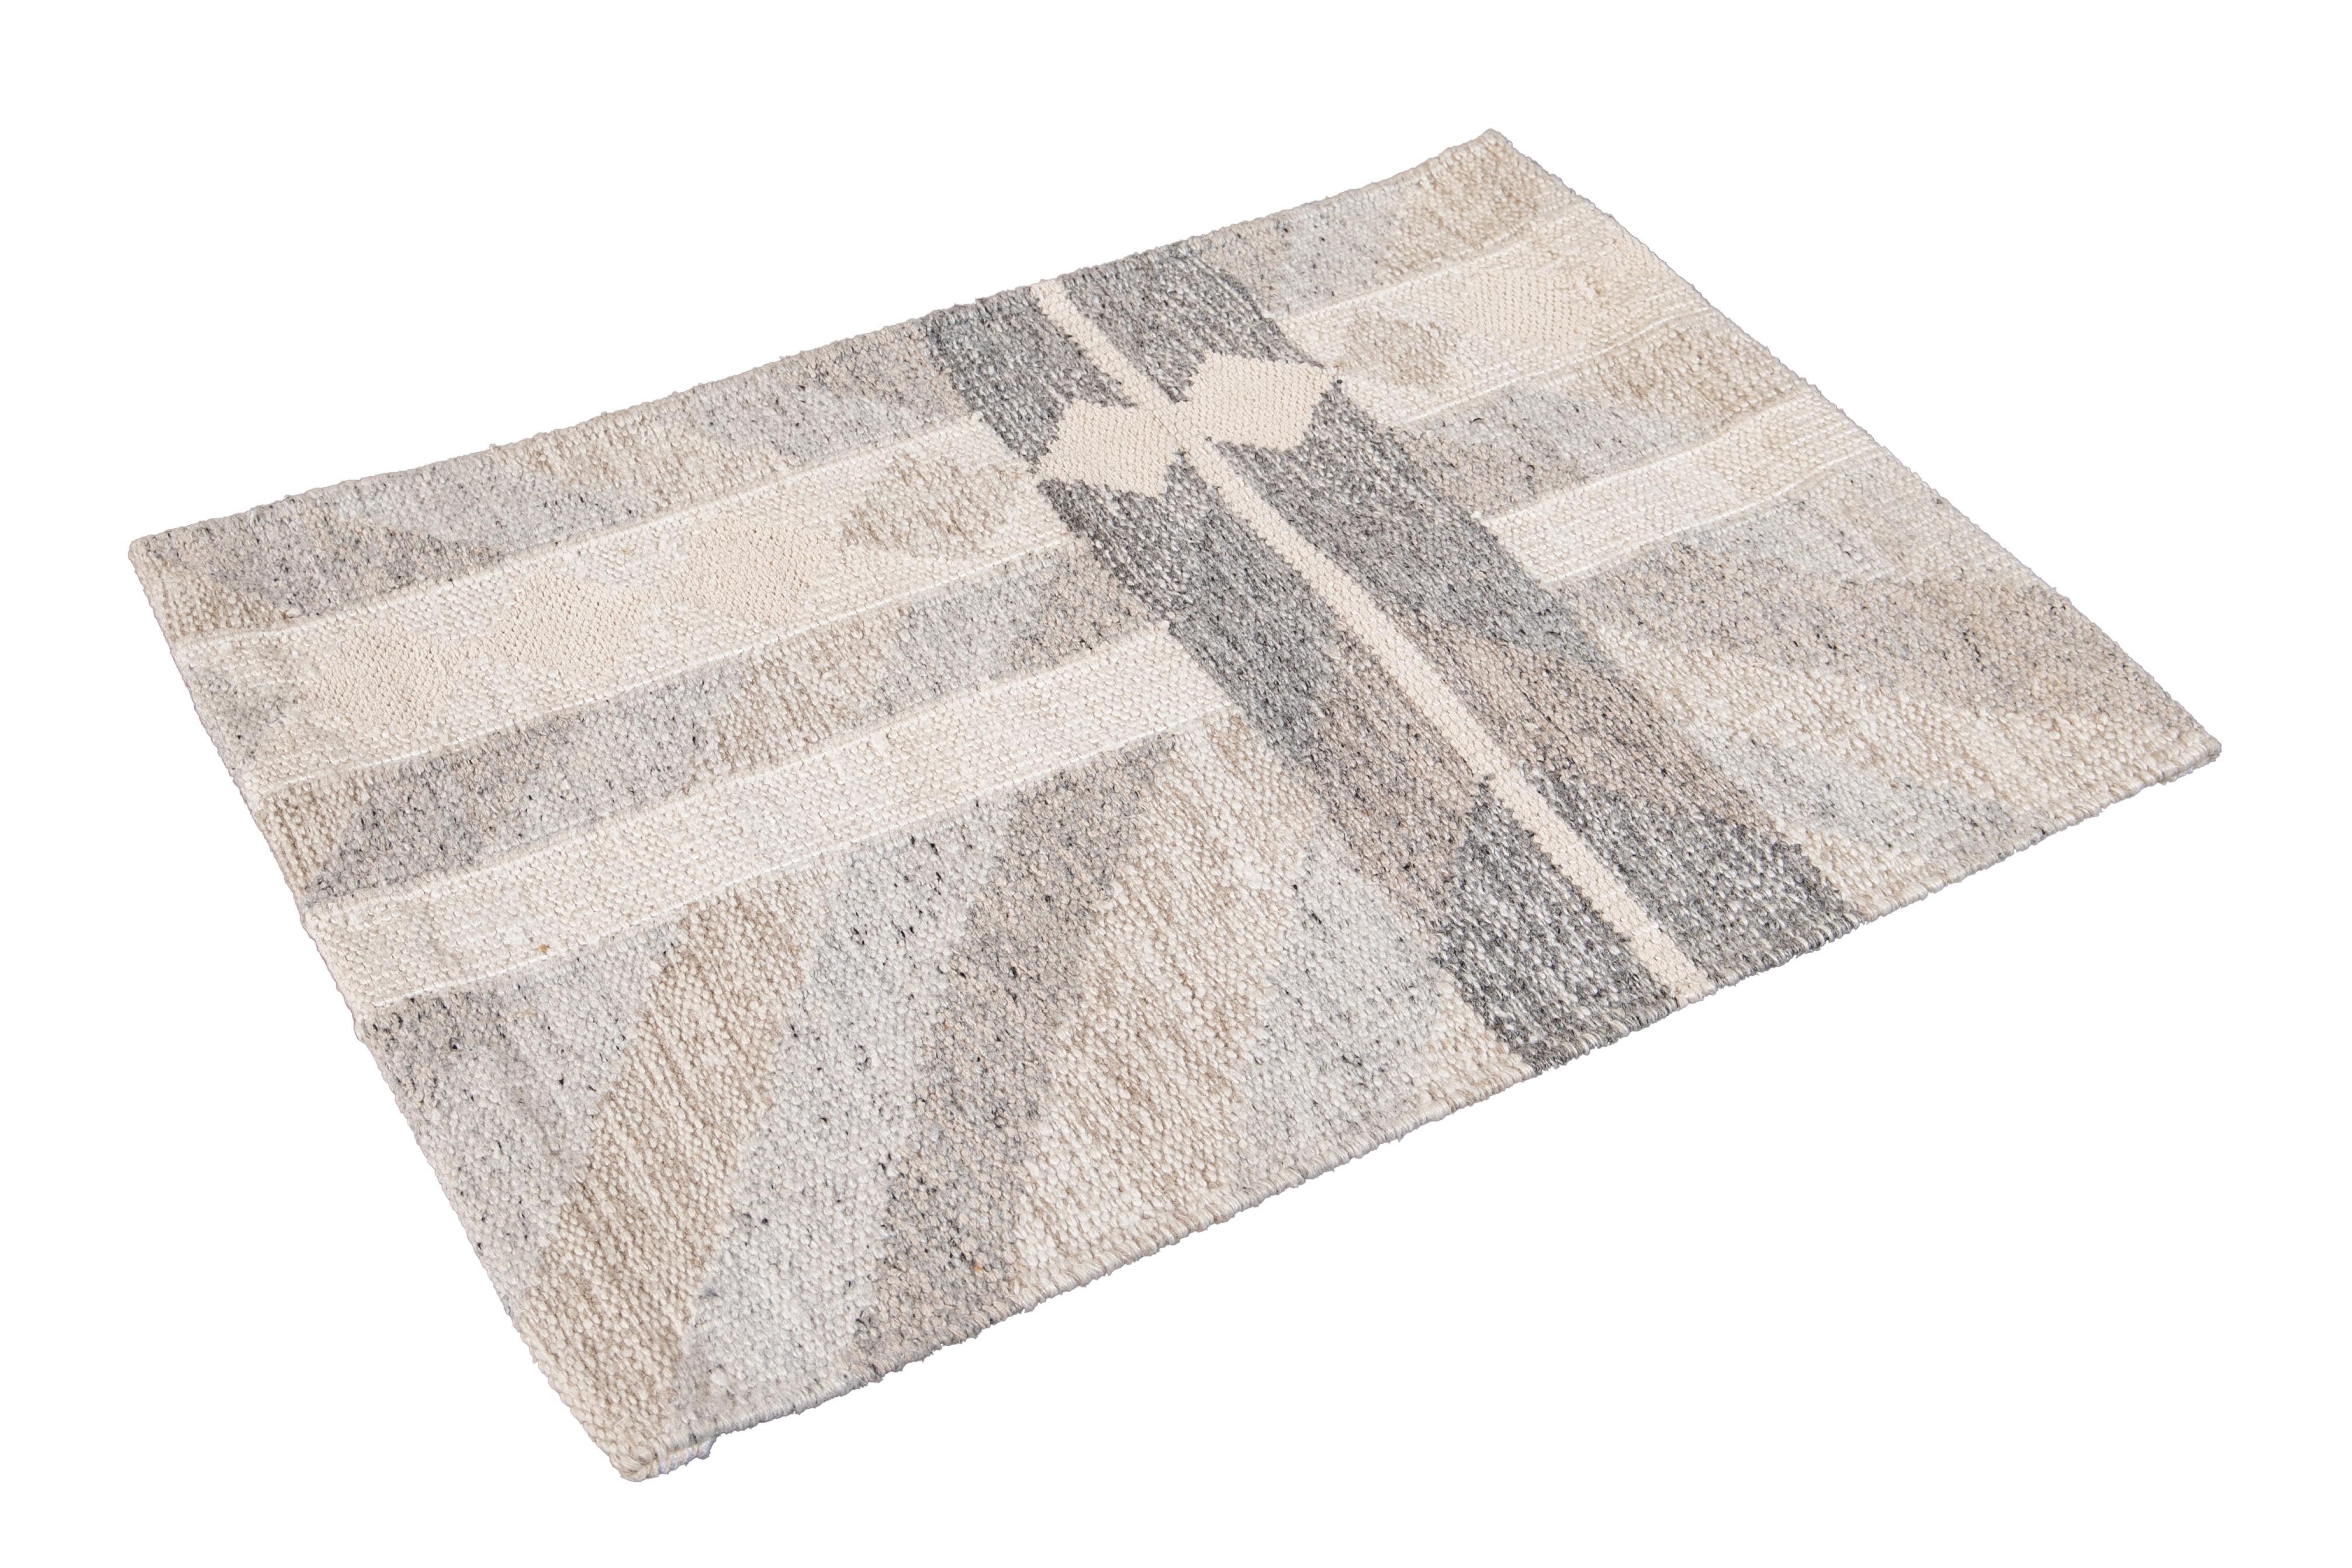 Wool Scandinavian style Kilim custom rug. Custom sizes and colors made-to-order.

Material: Wool 
Lead time: Approx. 15-20 weeks Available
Colors: Custom colors and styles available Made in India.
The price listed is for an 8' x 10' rug.